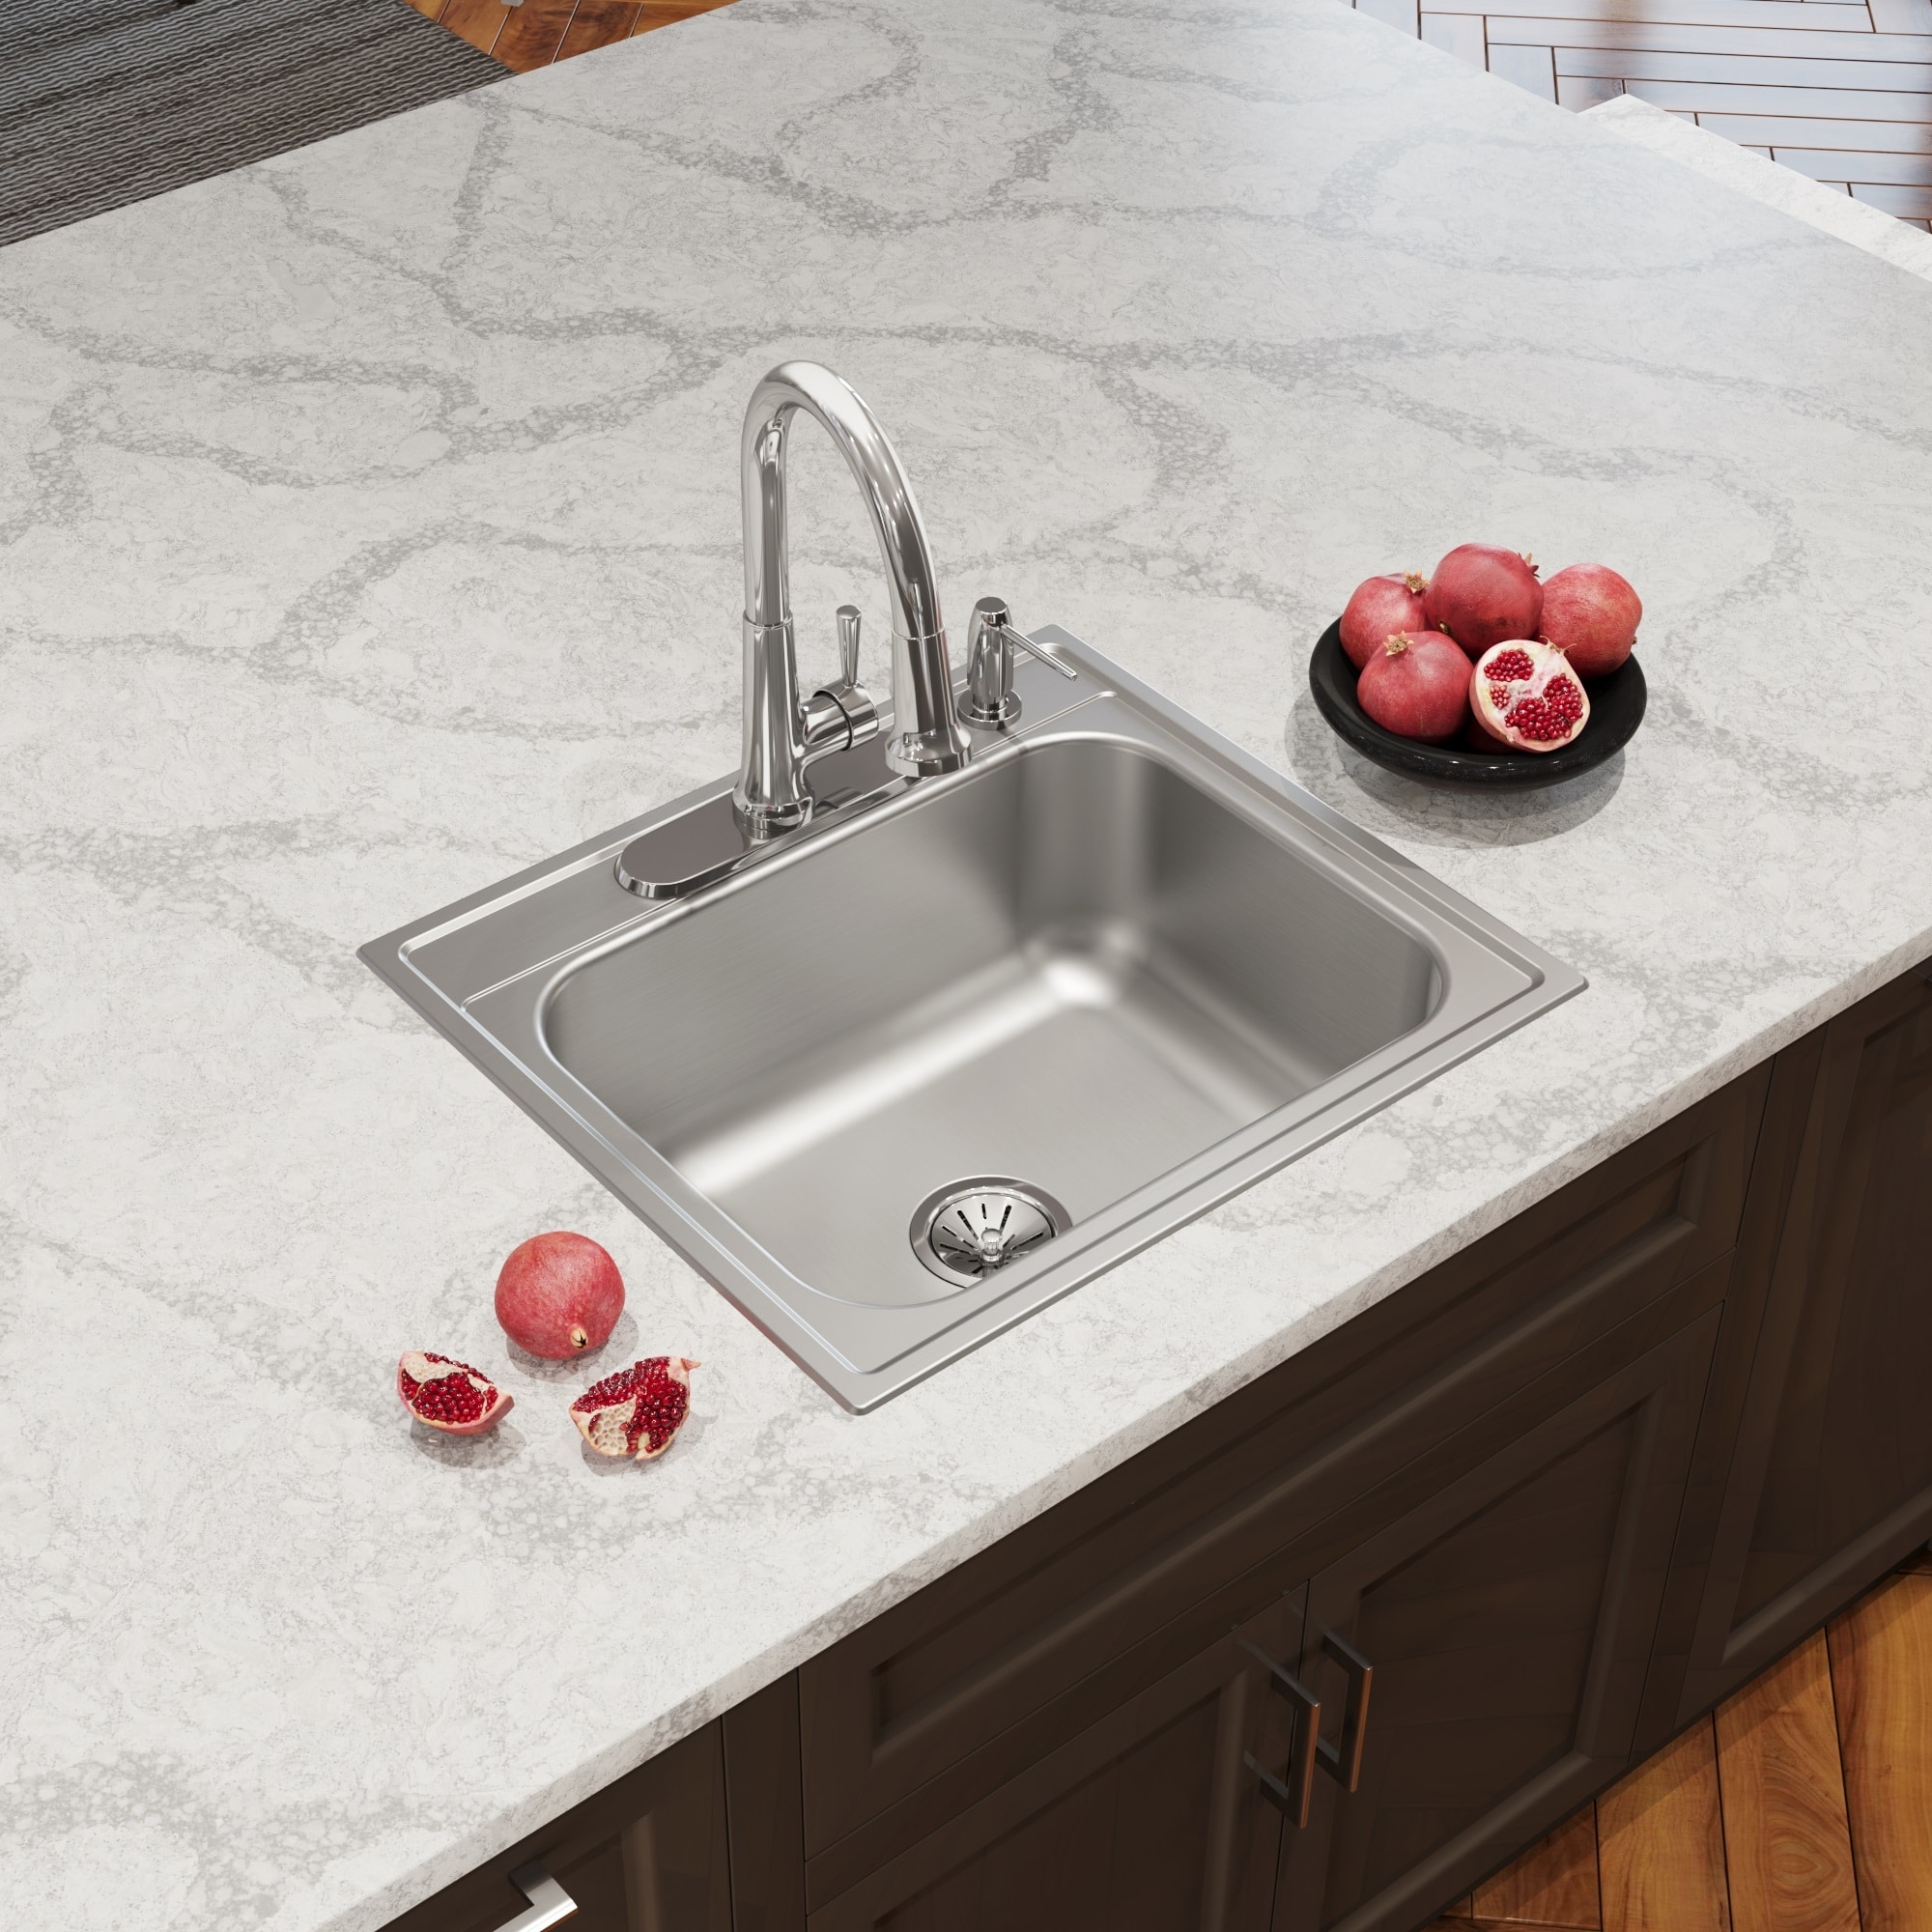 L ELKAY D125223 Drop-In Sink with Faucet Ledge 25 In MK-042/3AEG3*A 